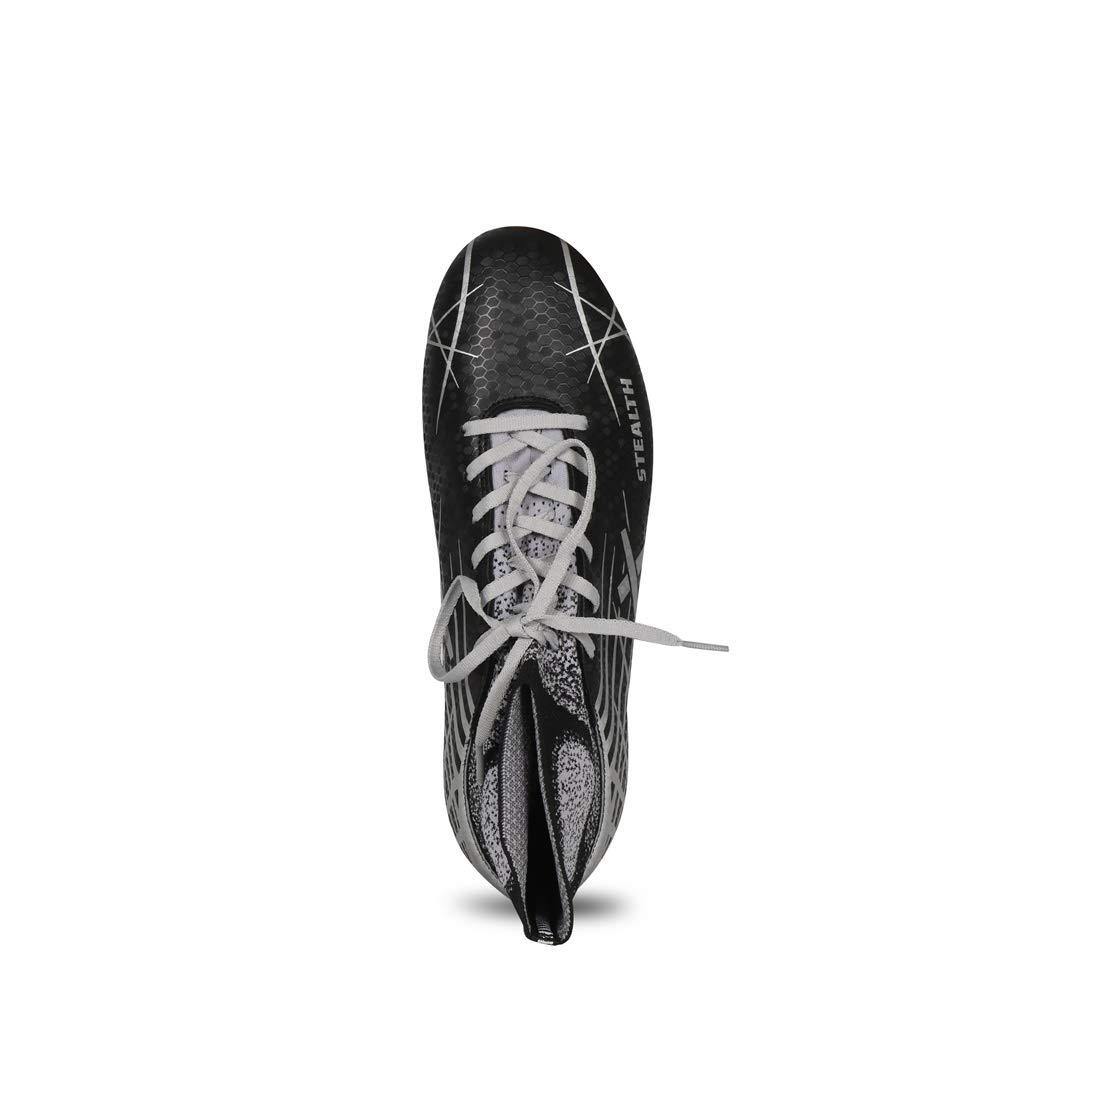 Vector X Stealth Synthetic Football Shoes (Black-Grey) - Best Price online Prokicksports.com